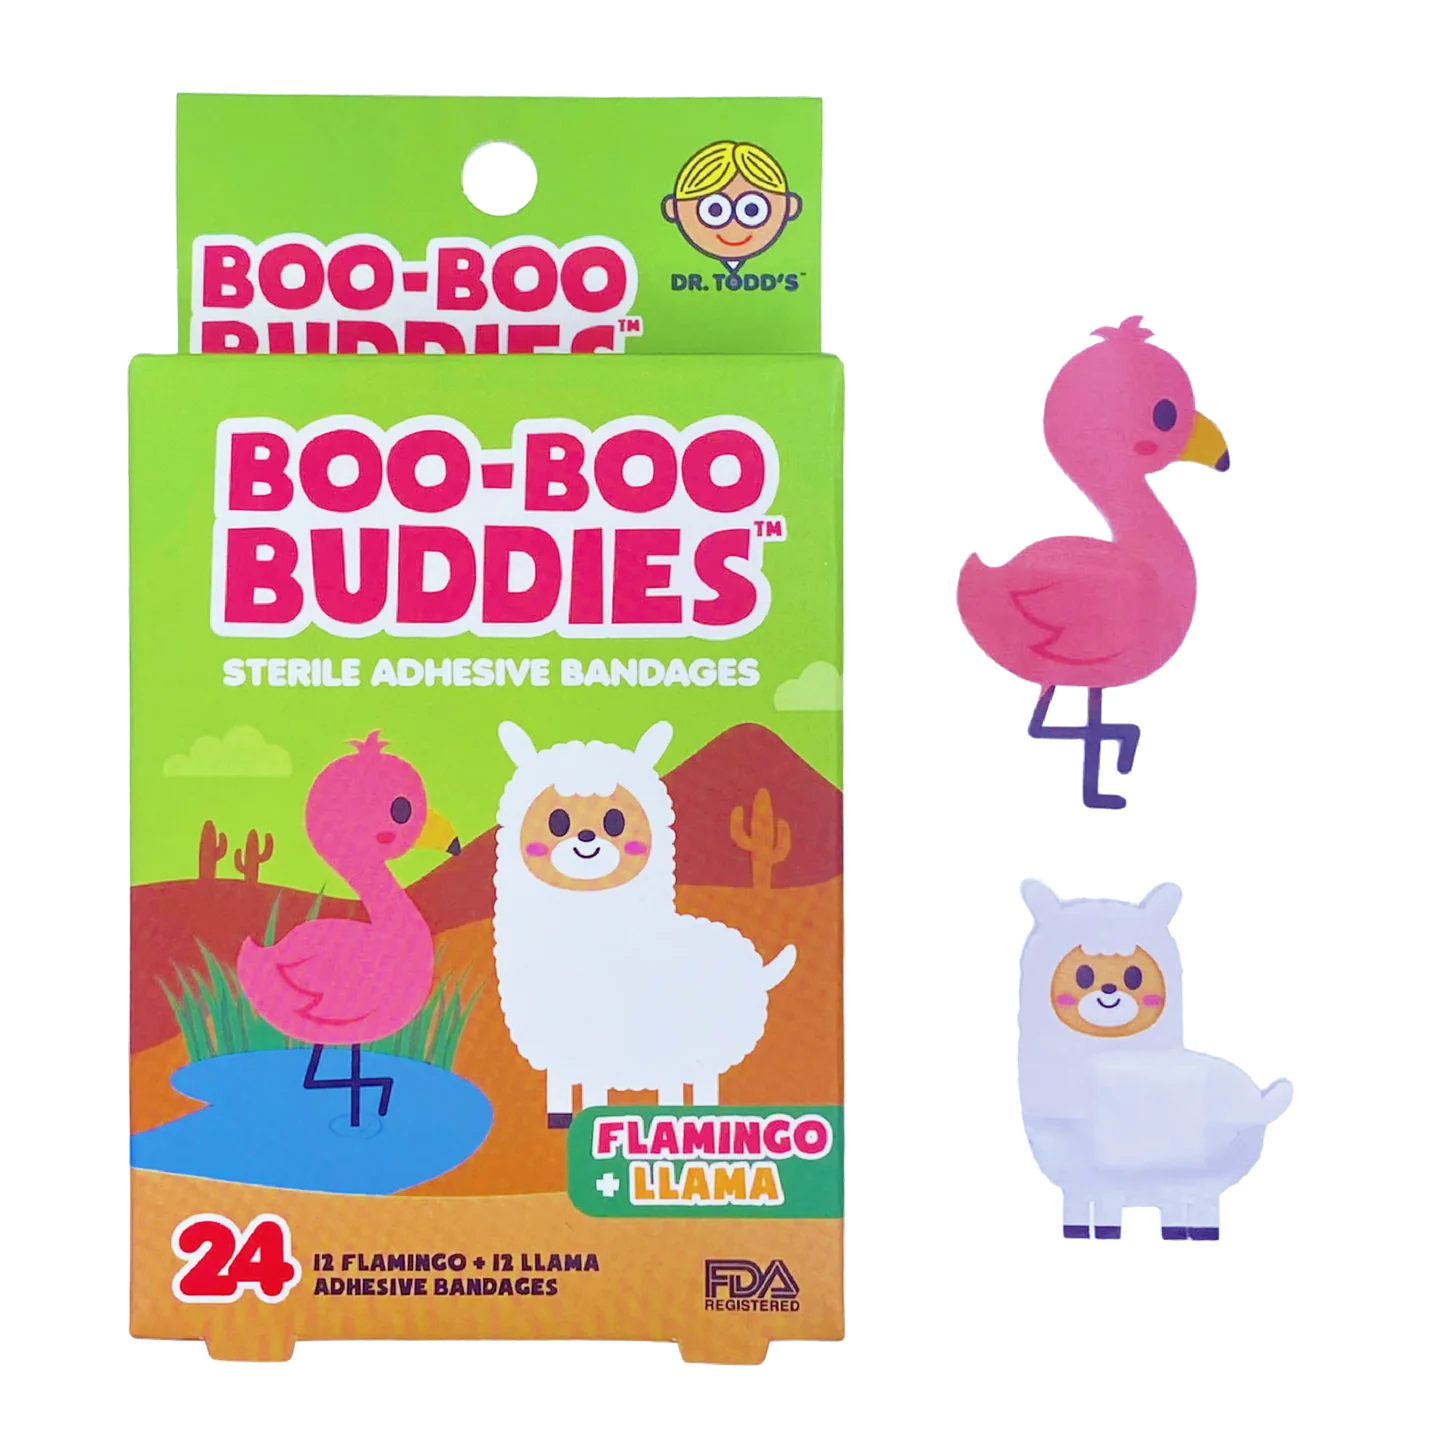 Boo-Boo Buddies: Bandages for your Boo-Boos